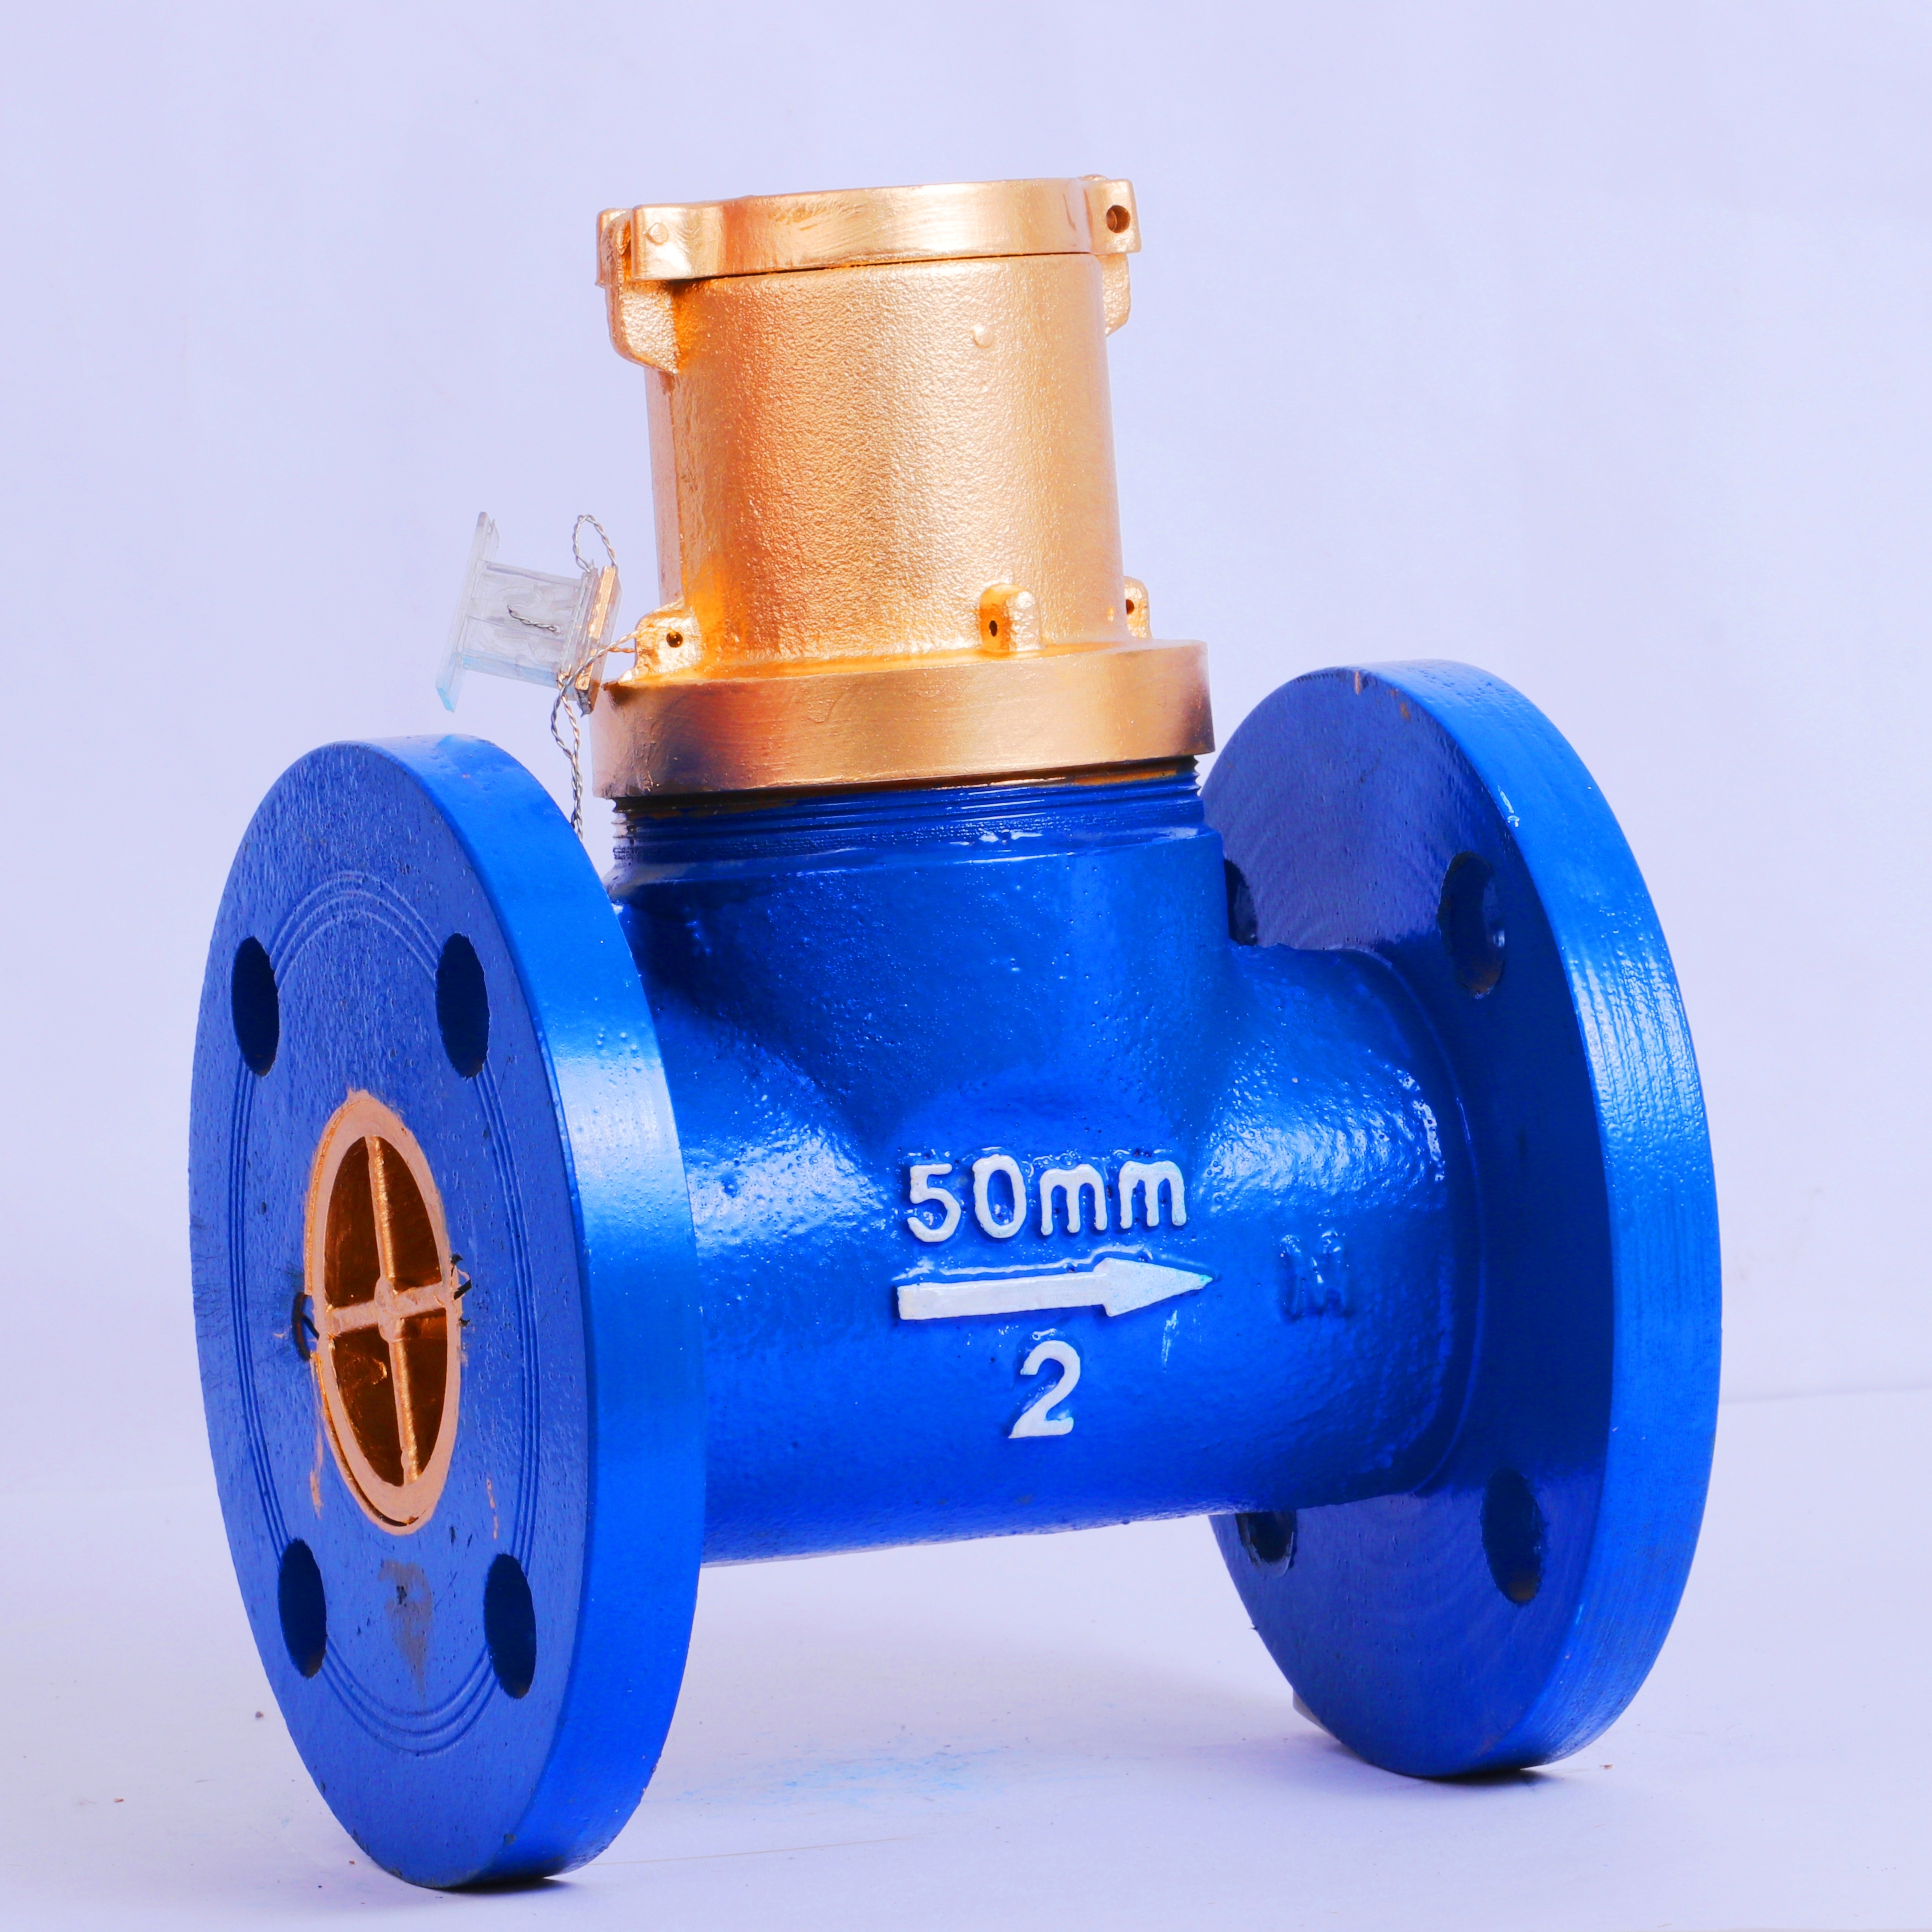 Bulk Encloded Class A Isi 2373 Flange End Water Meter